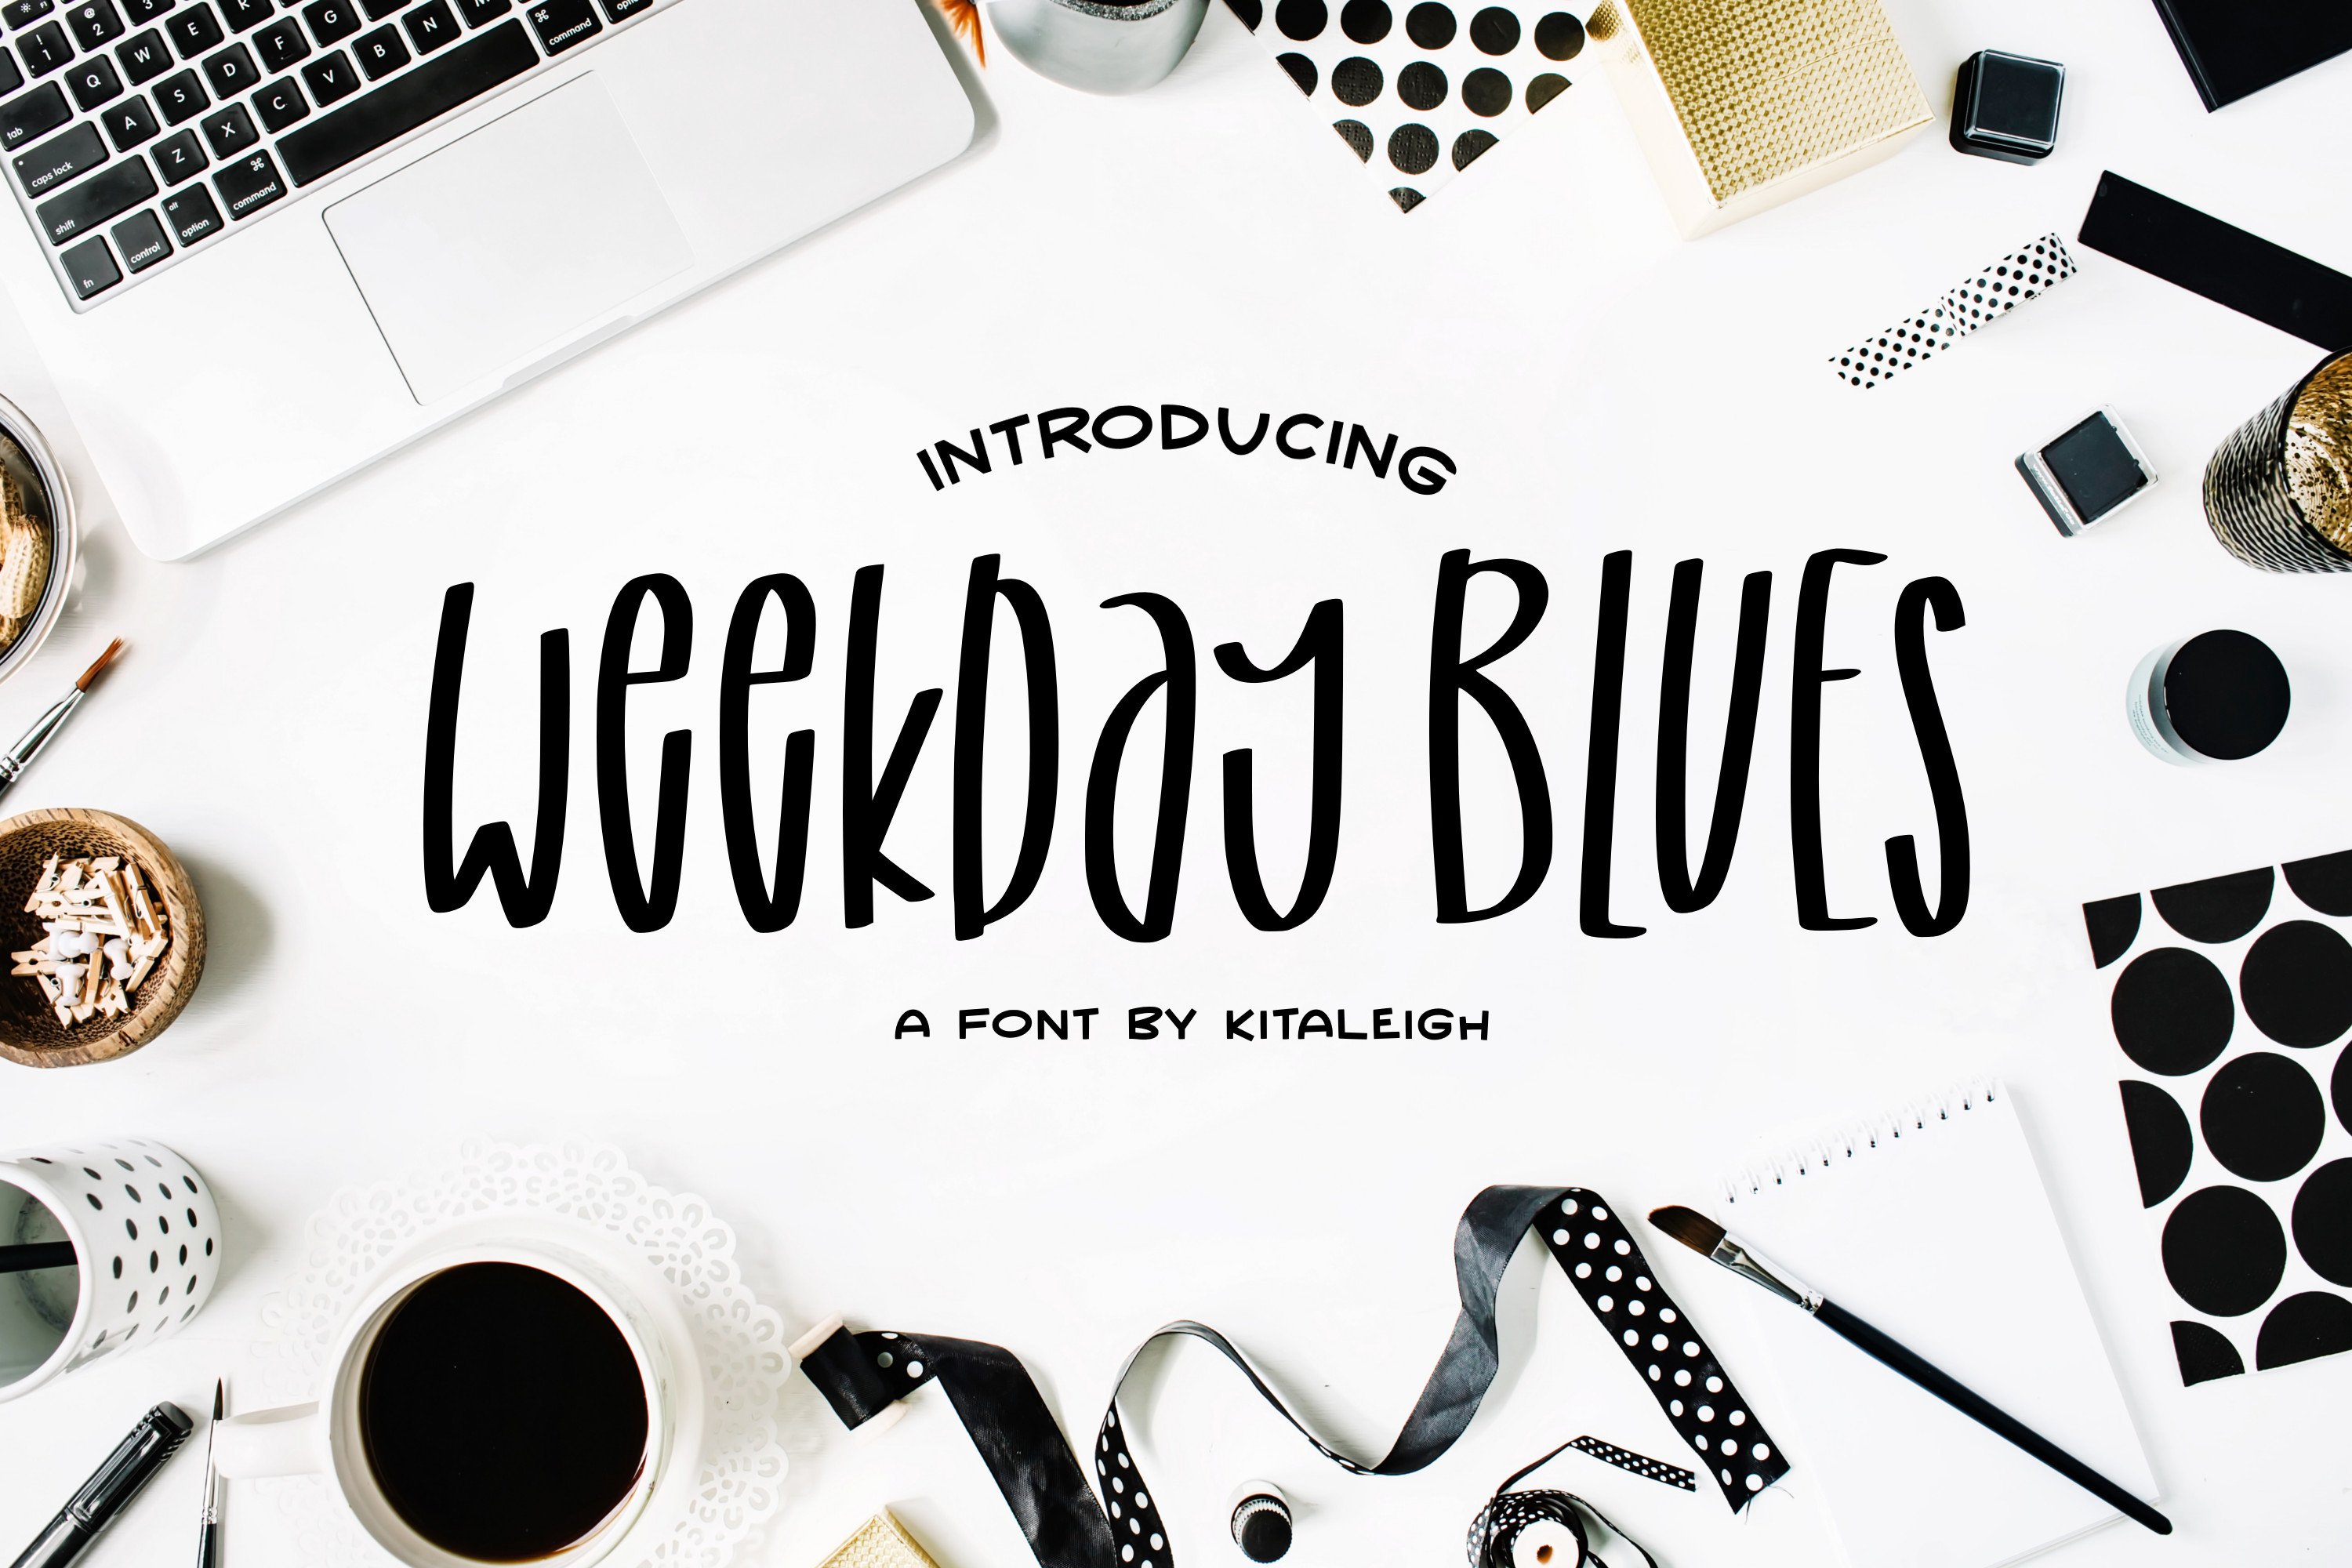 Weekday Blues cover image.